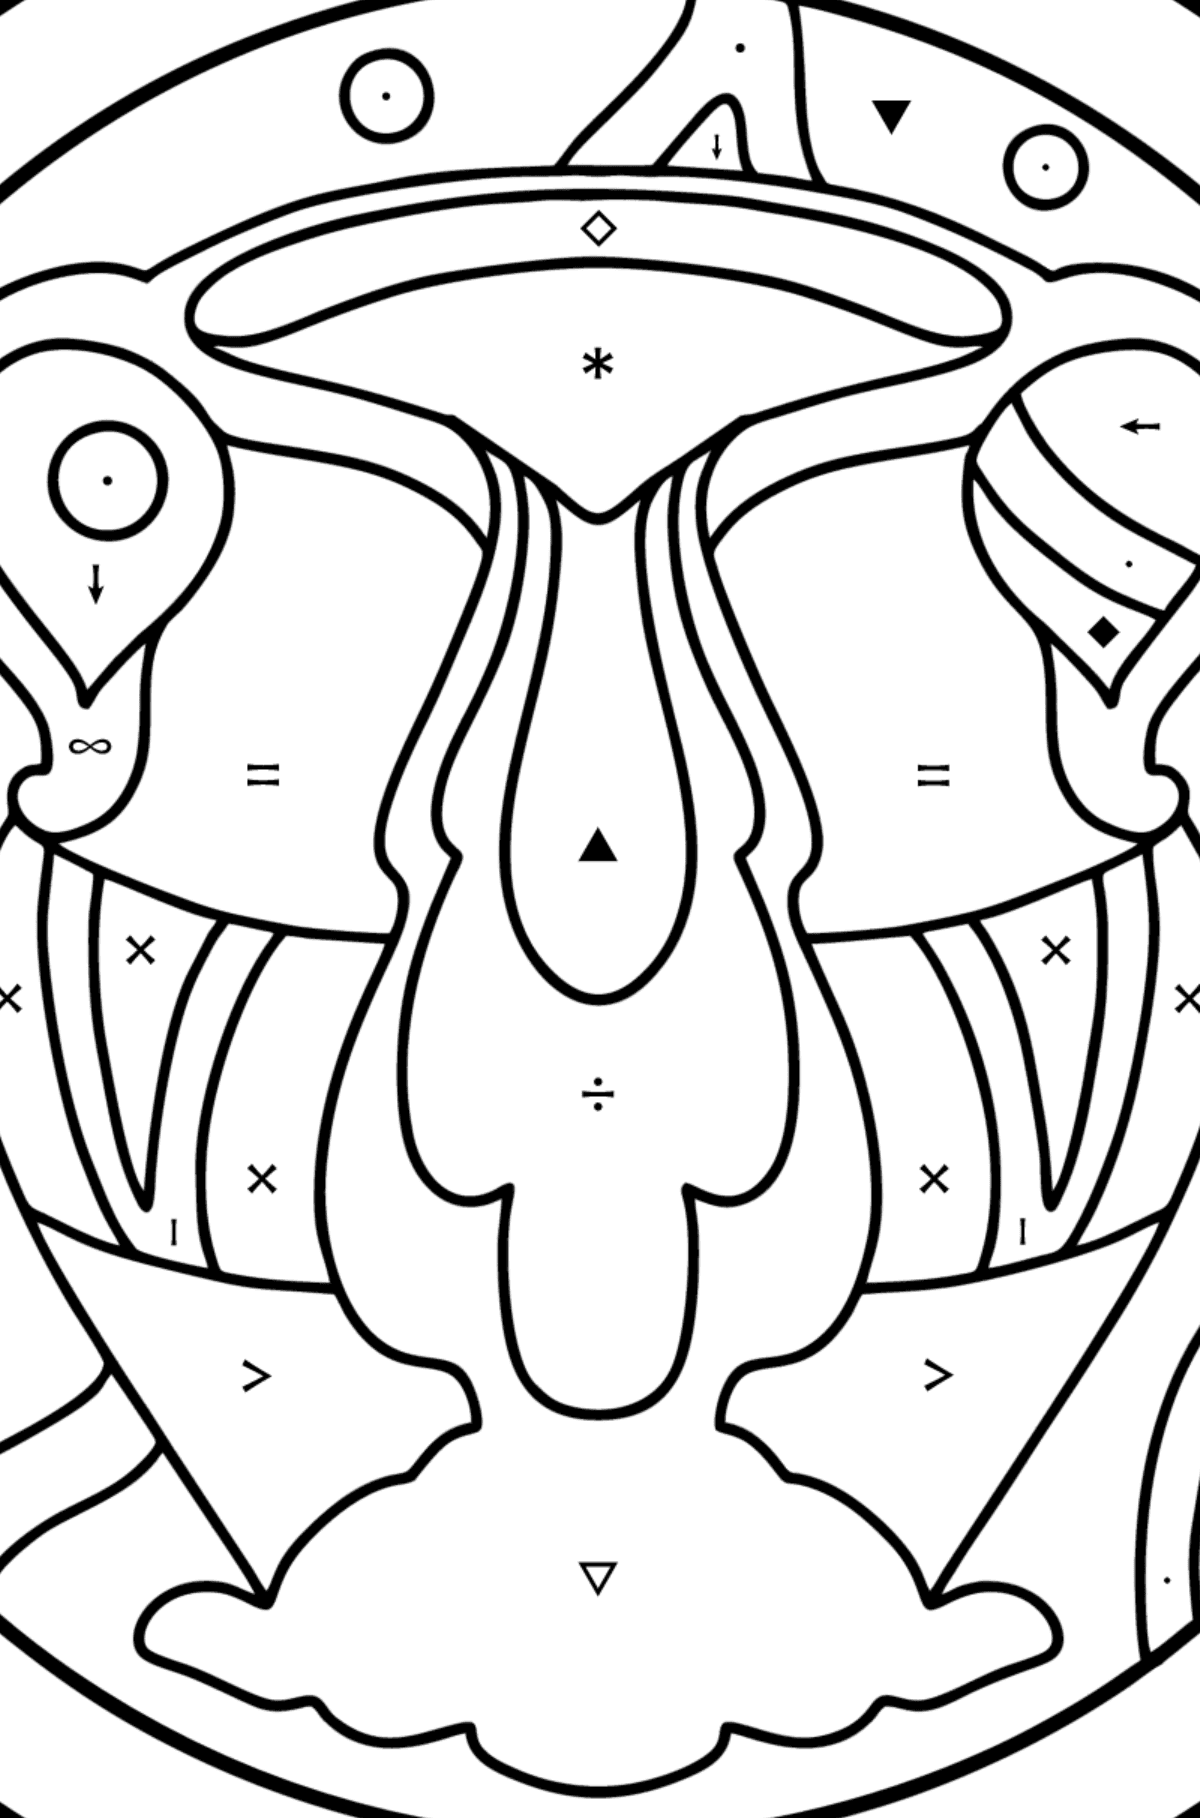 Coloring page for kids - zodiac sign Aquarius - Coloring by Symbols for Kids